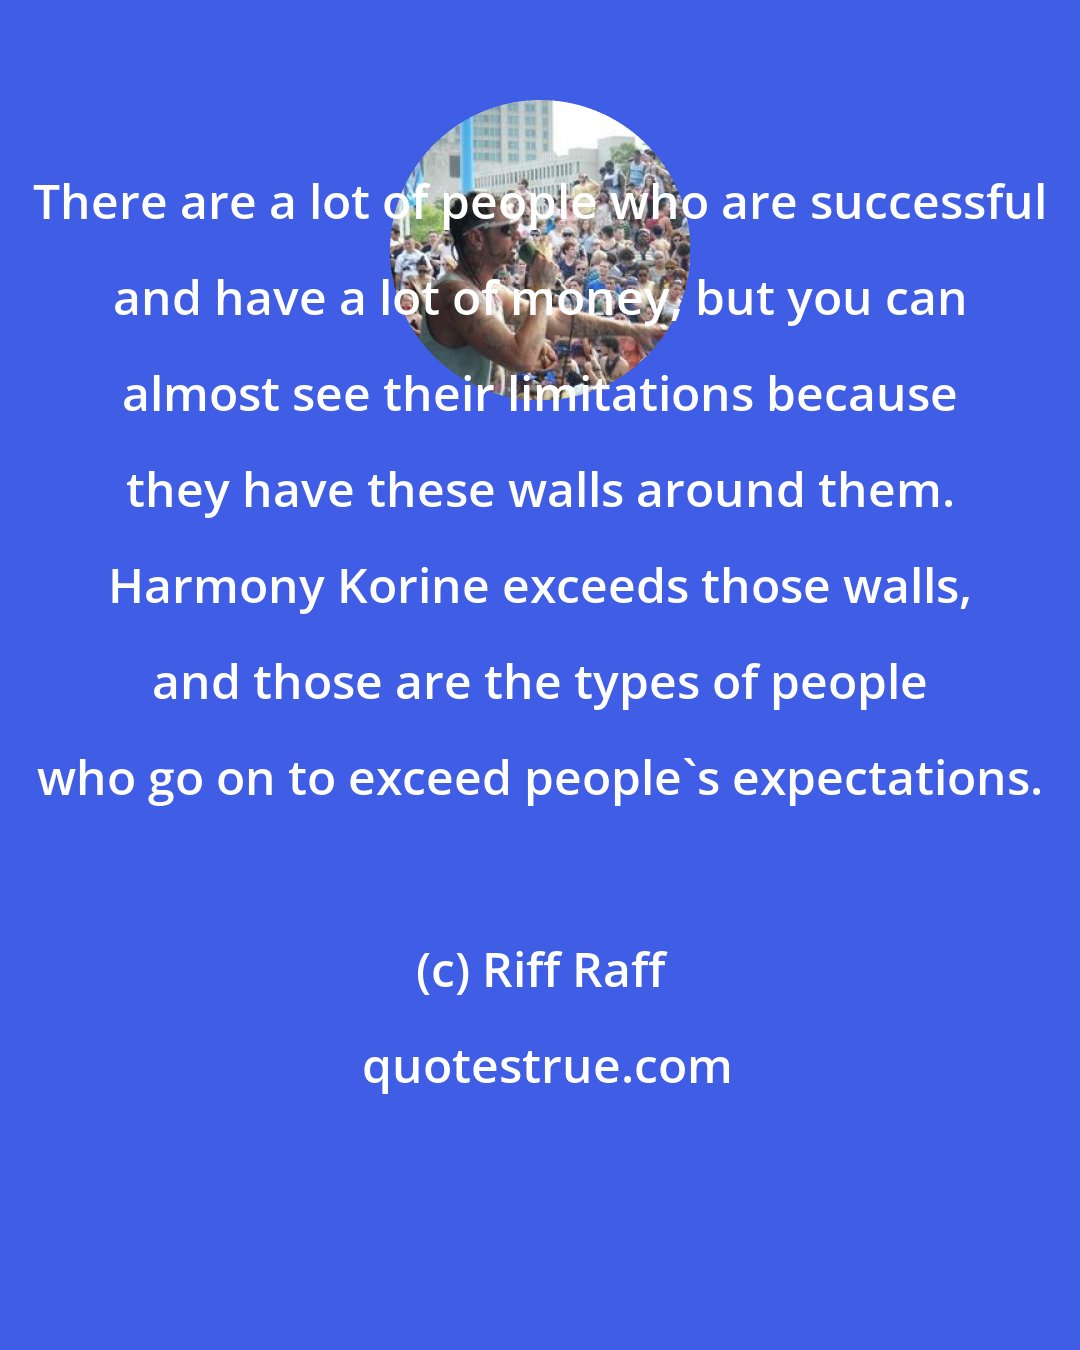 Riff Raff: There are a lot of people who are successful and have a lot of money, but you can almost see their limitations because they have these walls around them. Harmony Korine exceeds those walls, and those are the types of people who go on to exceed people's expectations.